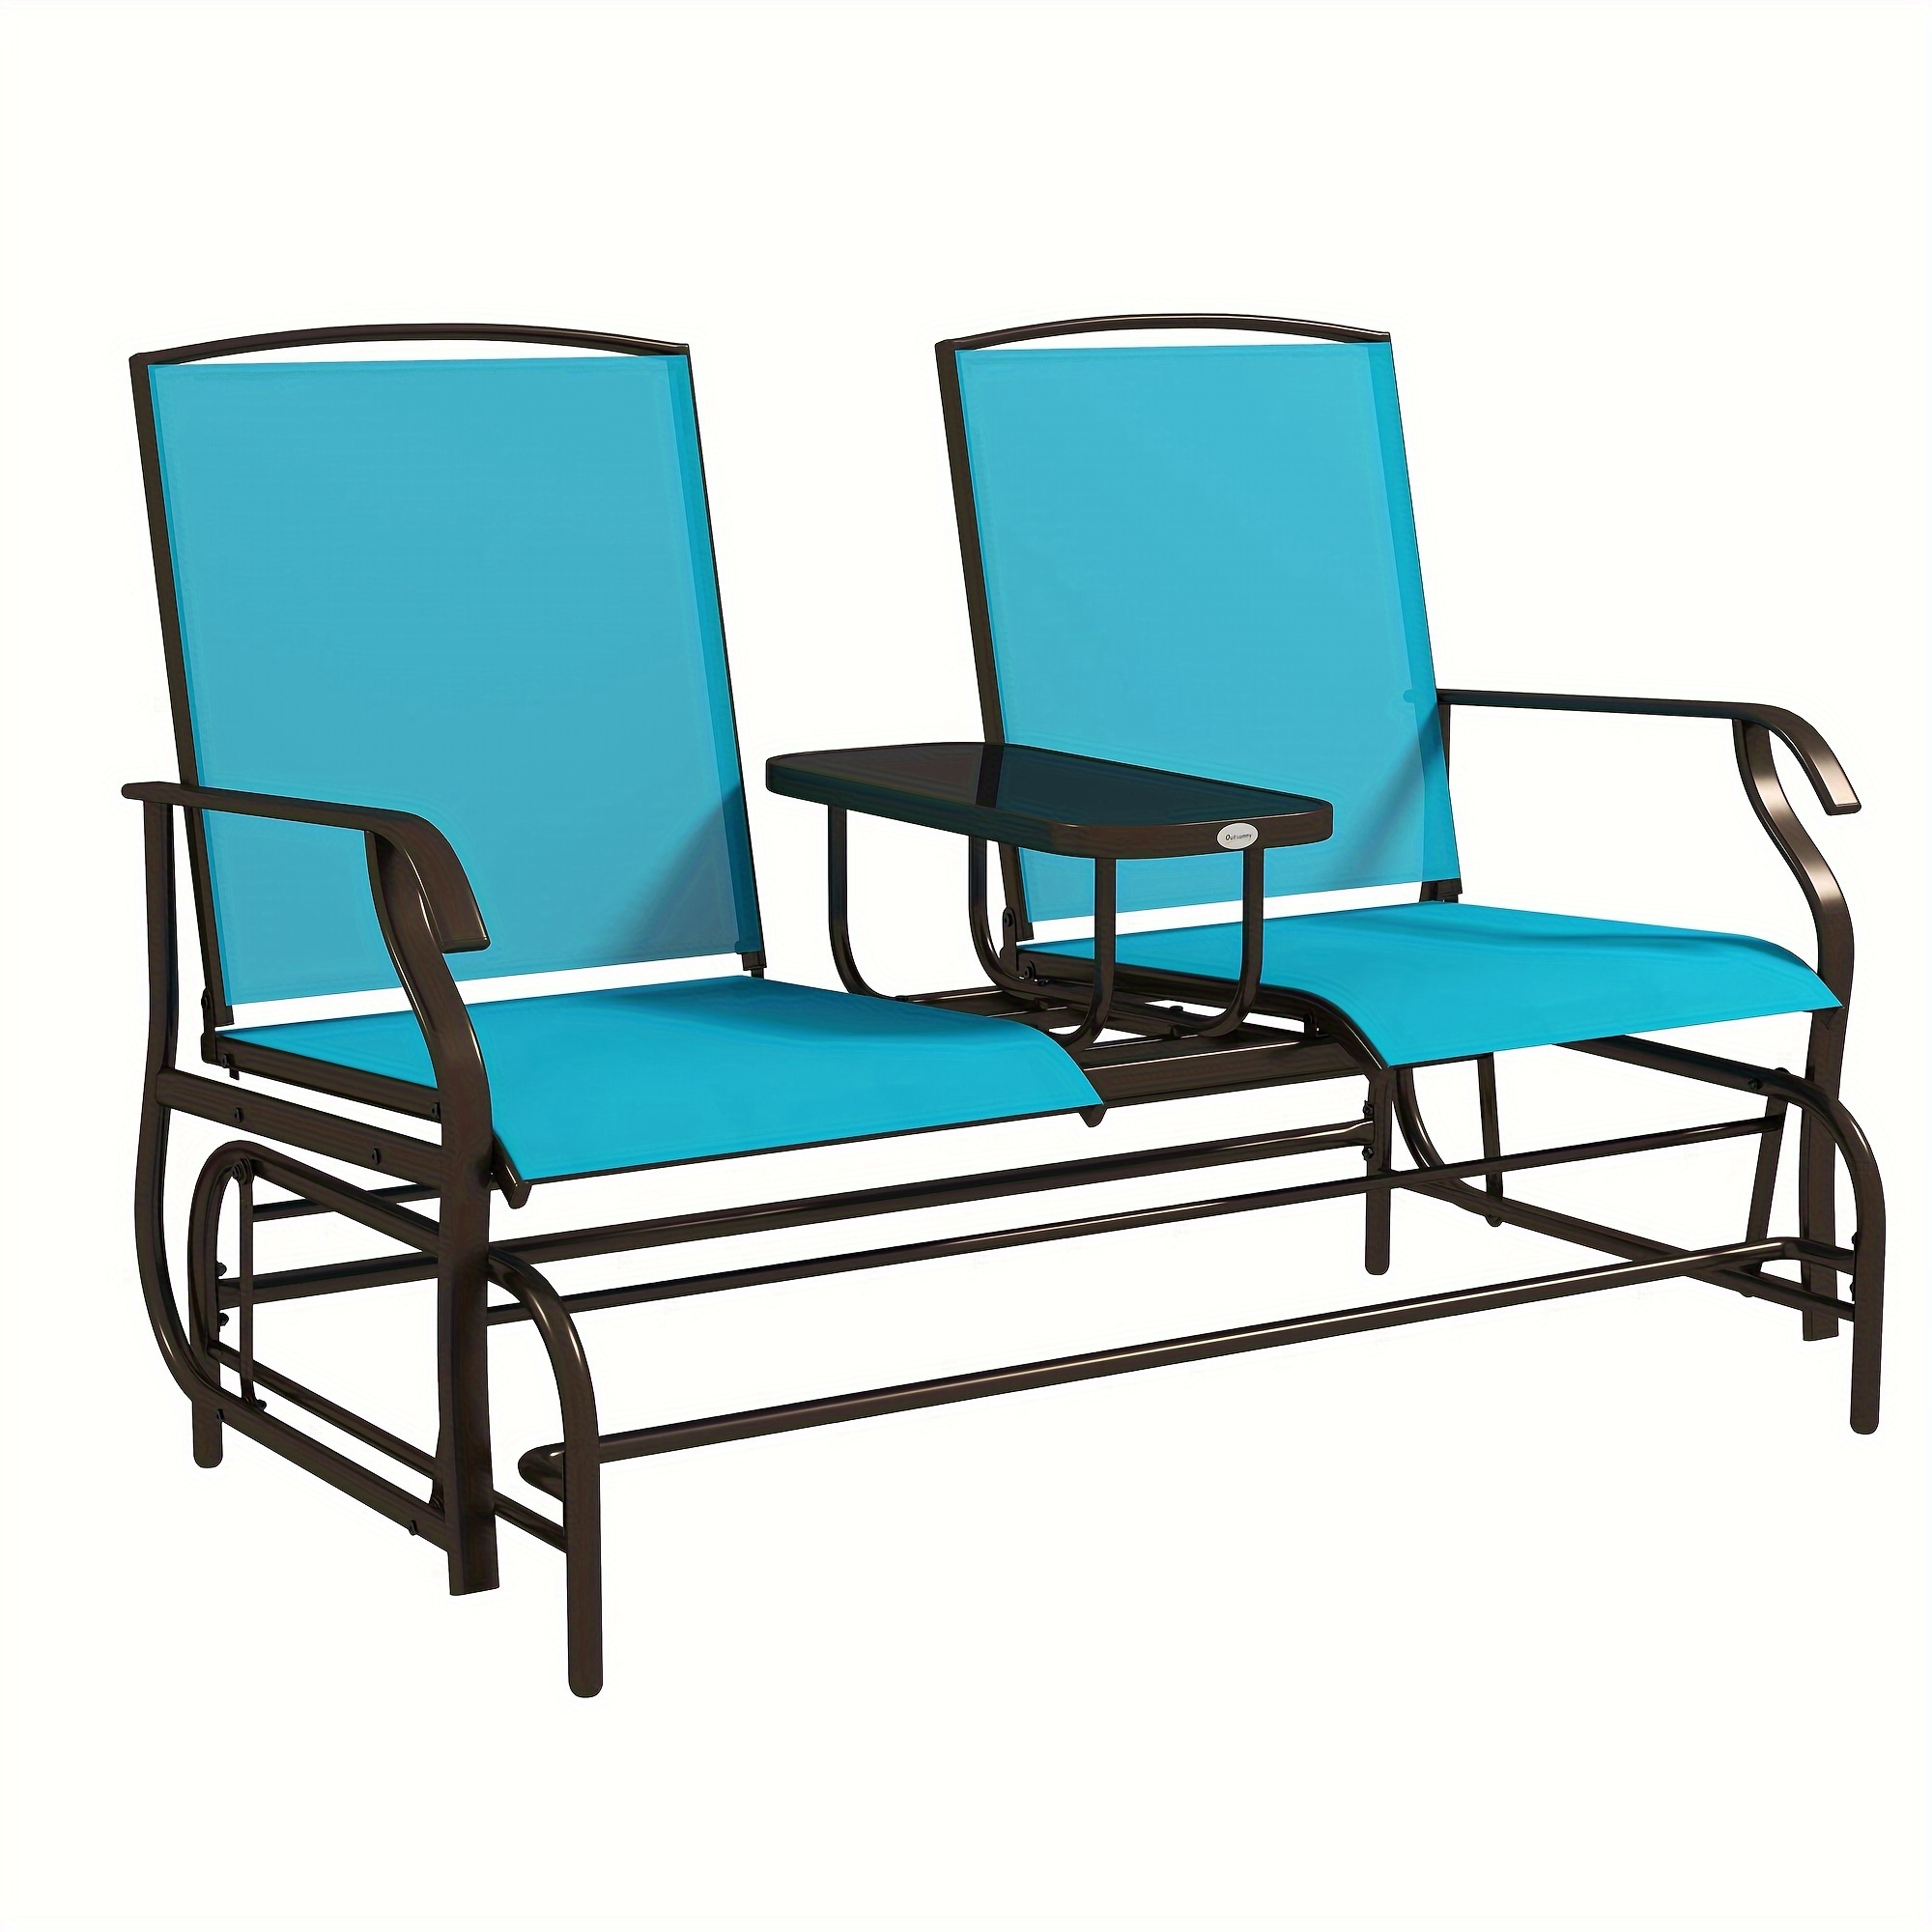 

Outsunny Outdoor Glider Bench With Center Table, Metal Frame Patio Loveseat With Breathable Mesh Fabric And Armrests For Backyard Garden Porch, Blue